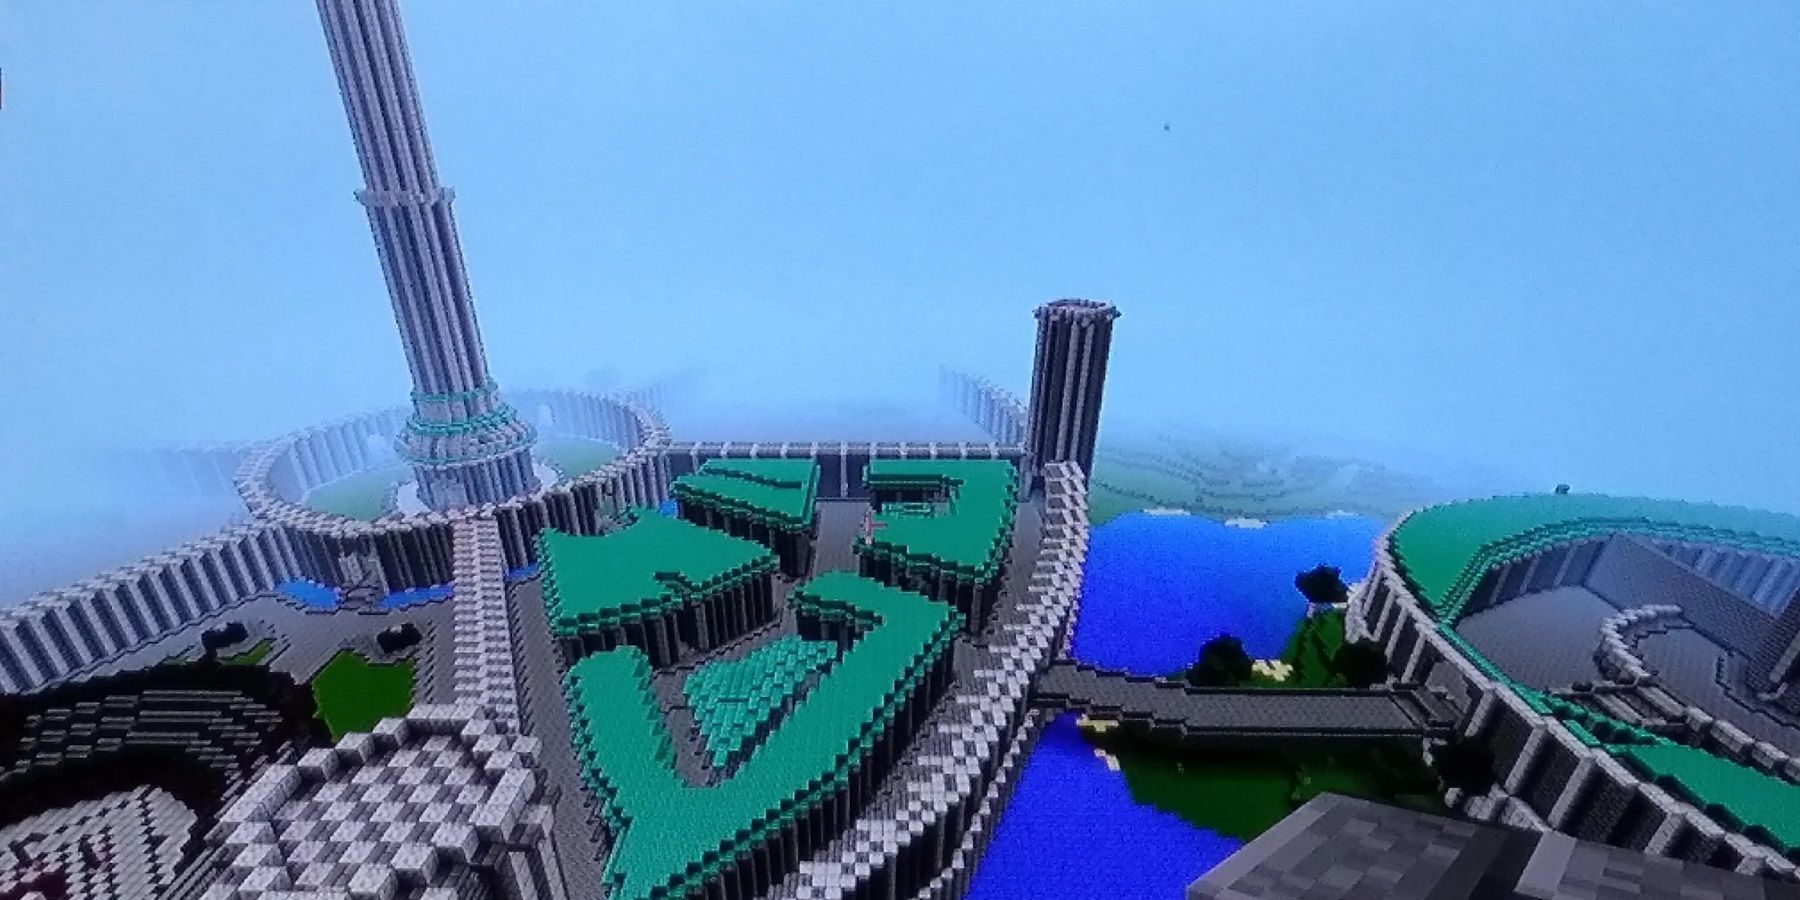 Image from Minecraft showing the White-Gold tower from Oblivion's Imperial City.